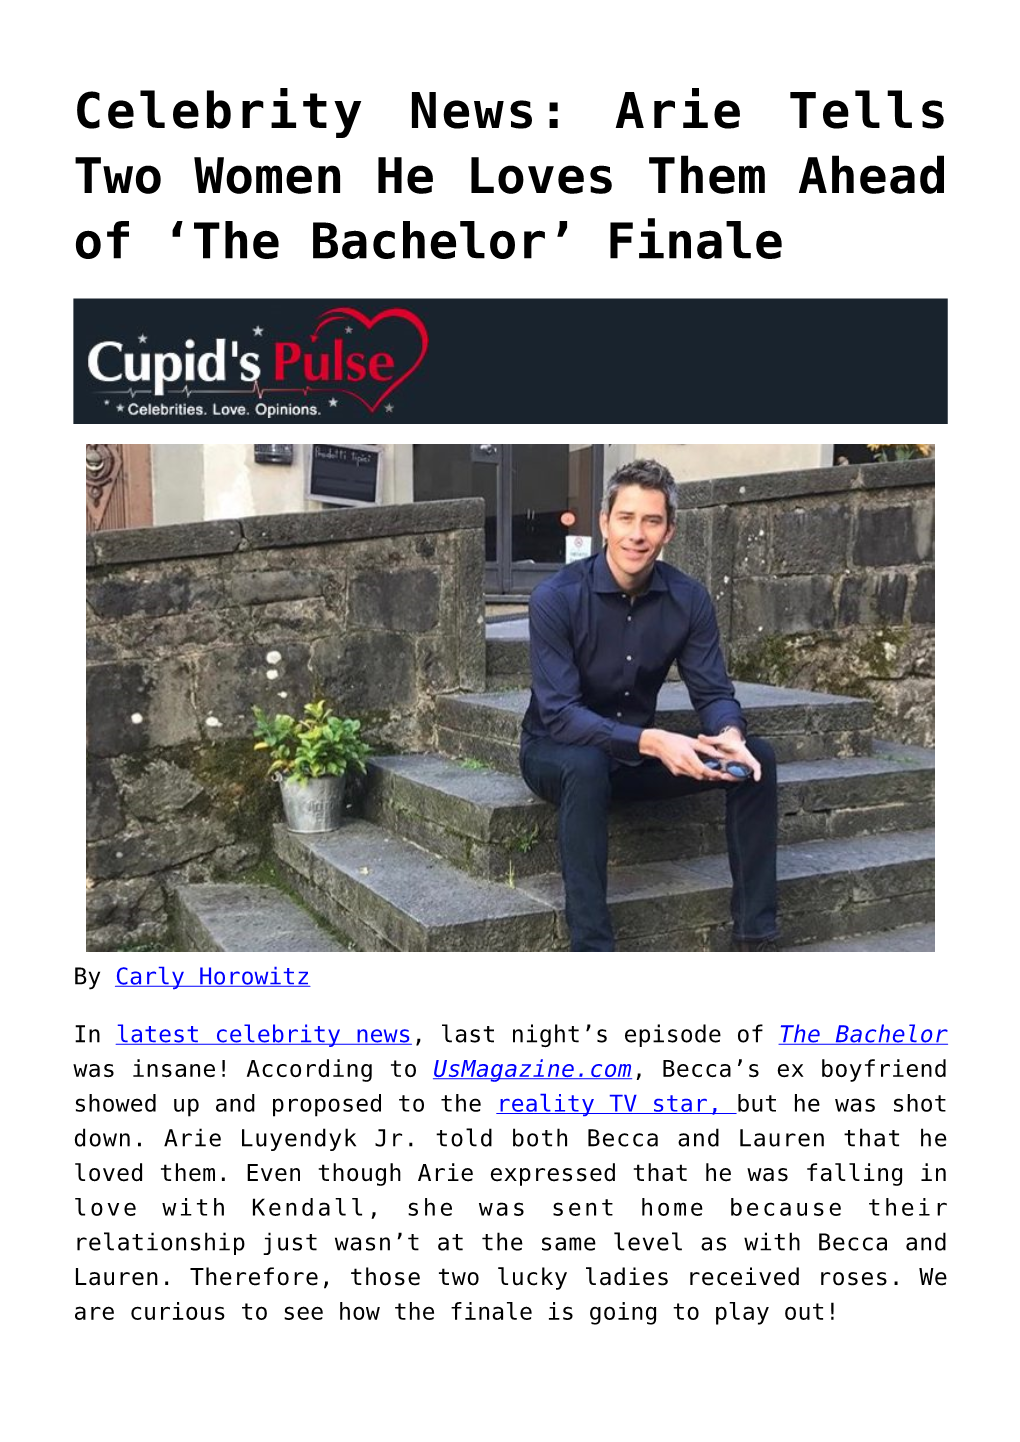 Celebrity News: Arie Tells Two Women He Loves Them Ahead of ‘The Bachelor’ Finale